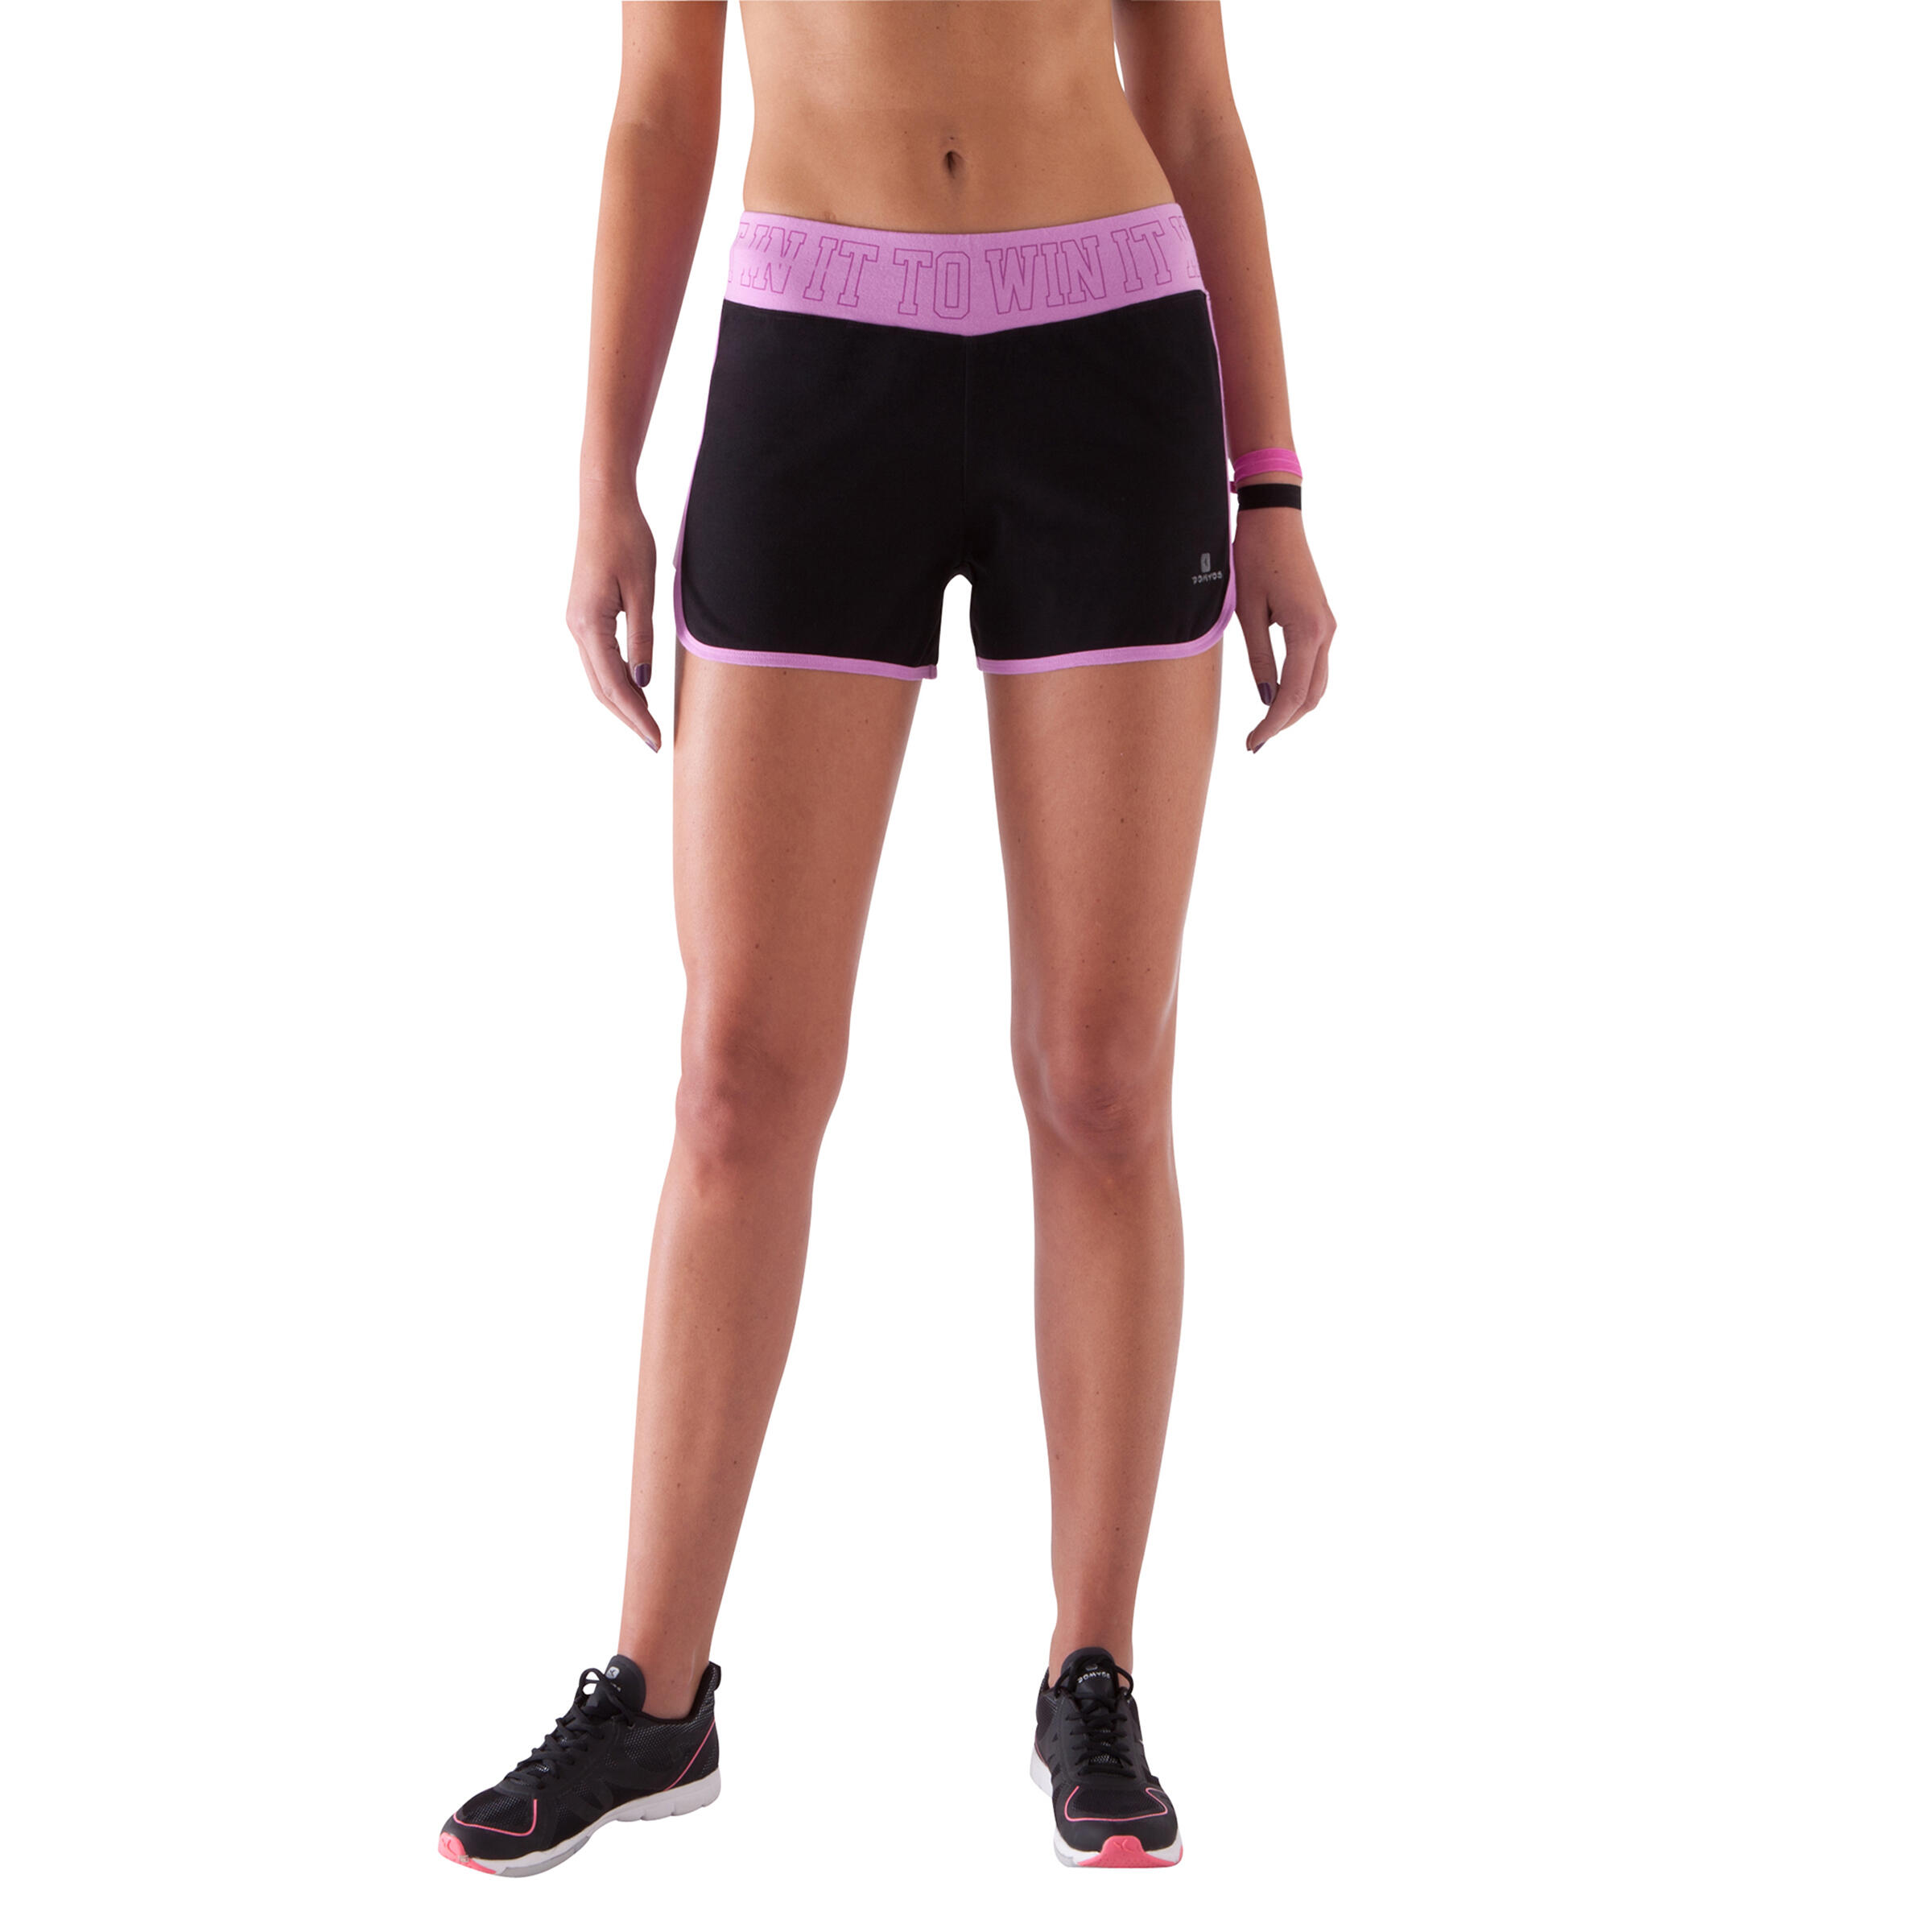 Women's Fitness Shorts with Contrasting Print Waistband - Black/Pink 3/11